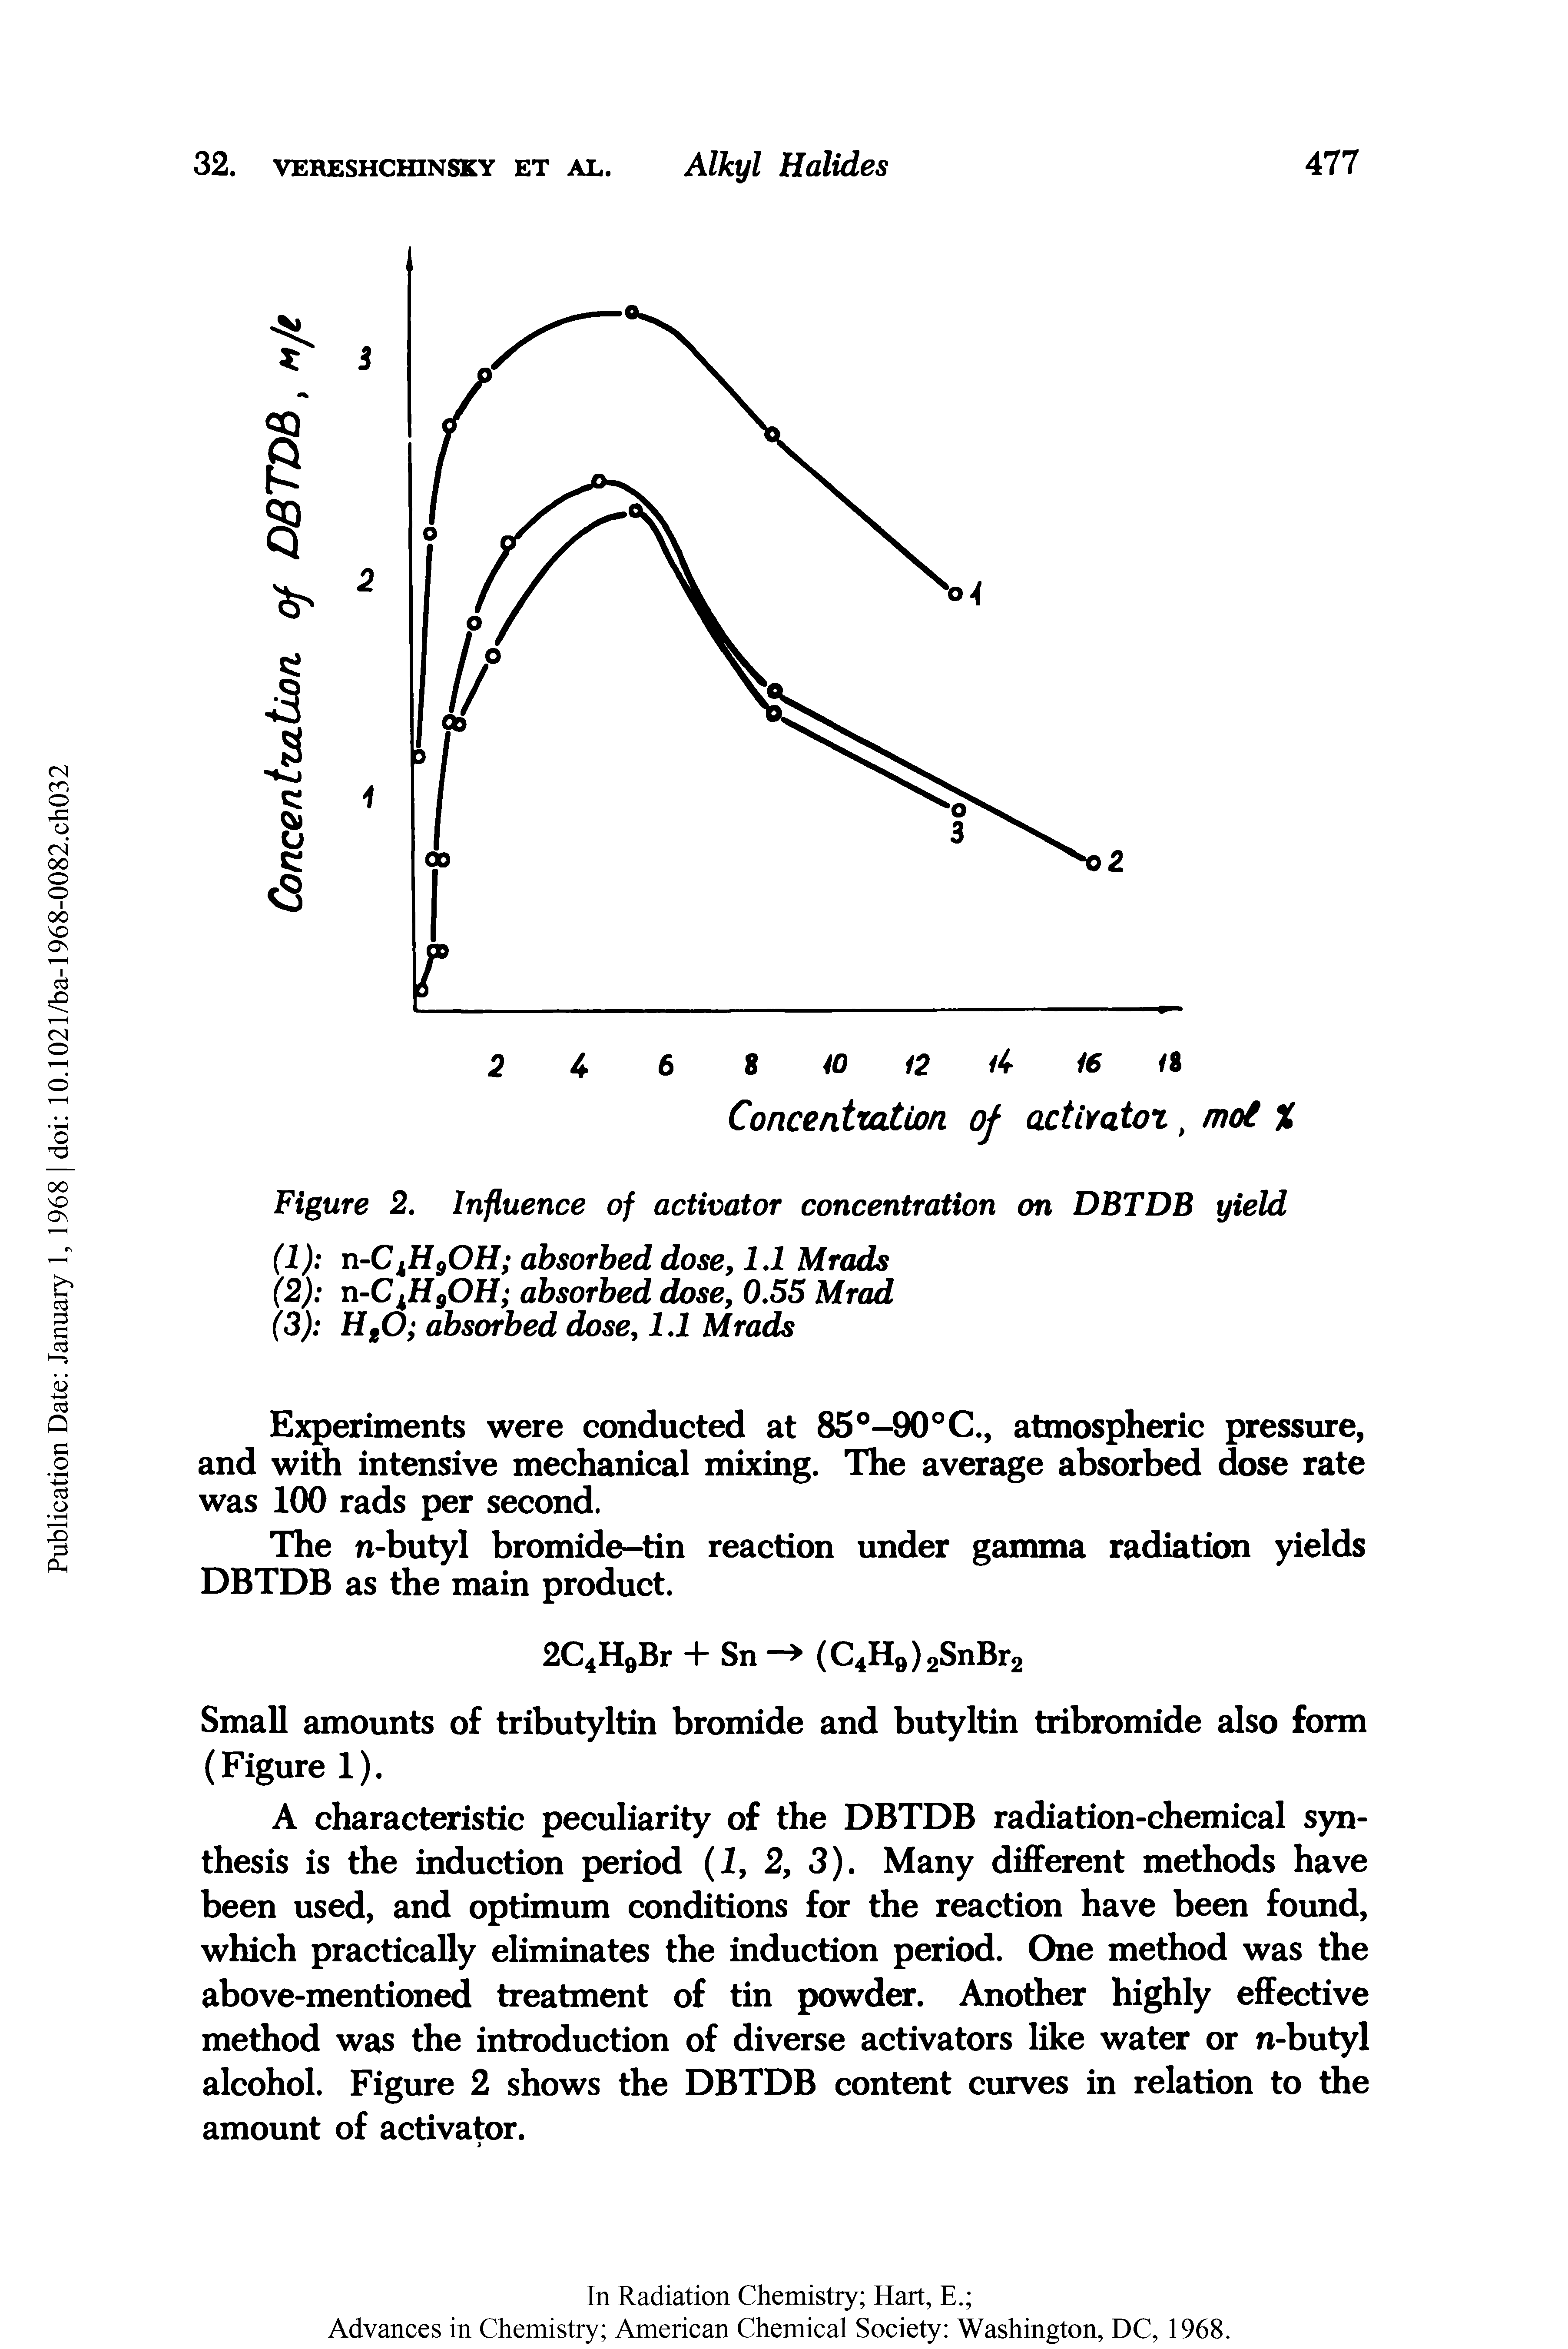 Figure 2. Influence of activator concentration on DBTDB yield...